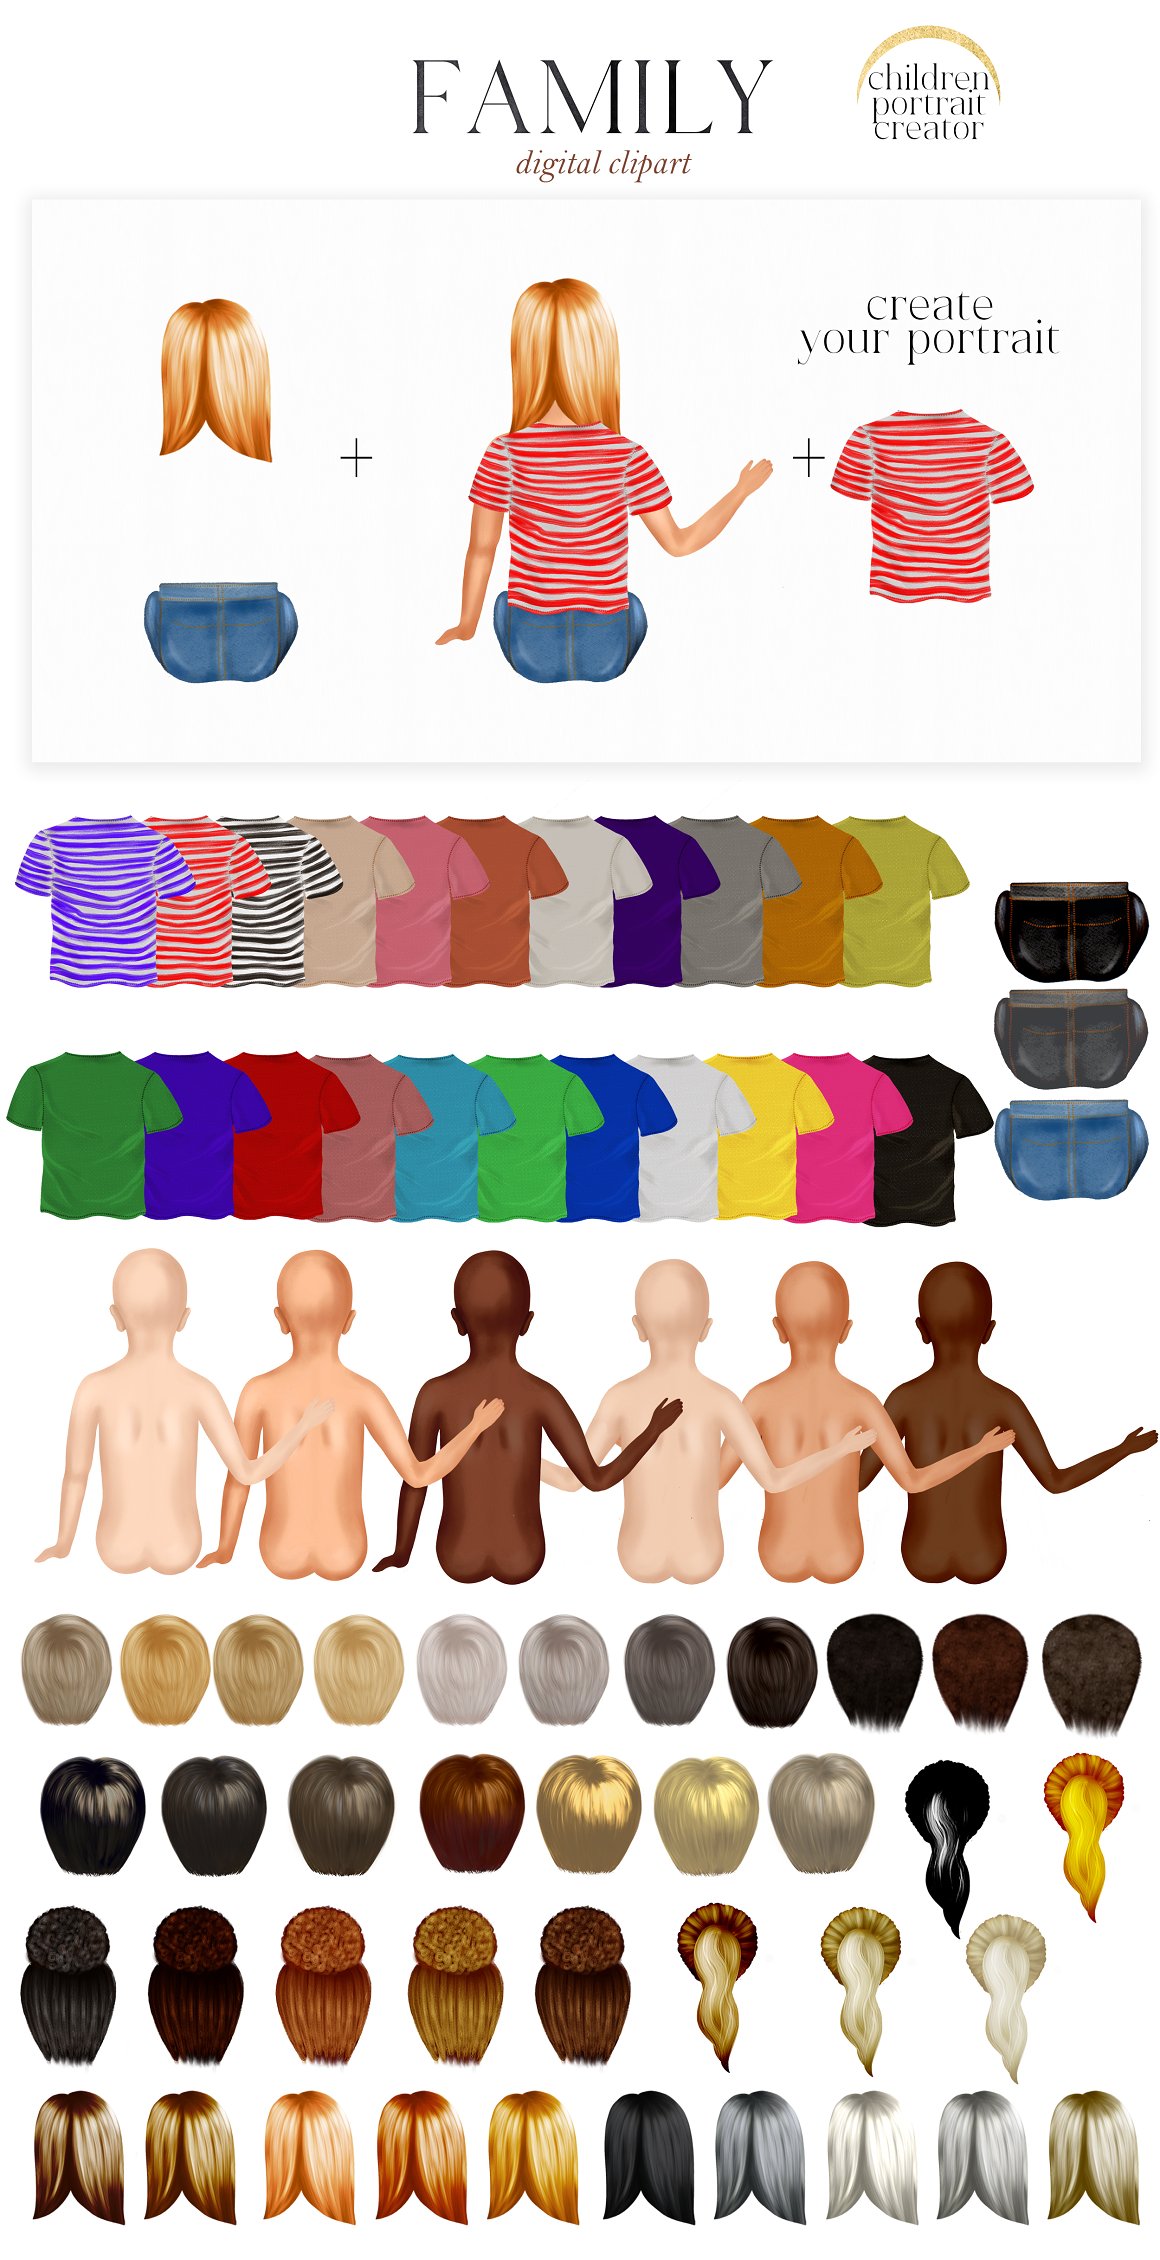 A set of body in different skin tones, clothes and hairstyles for children.